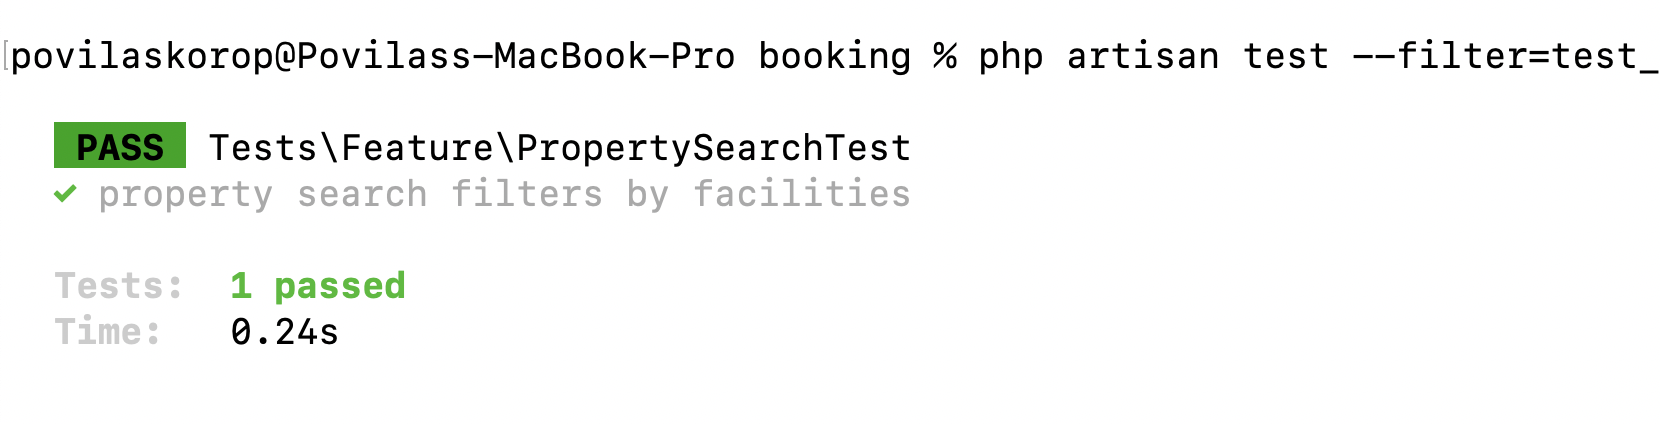 Property search filter by facilities test